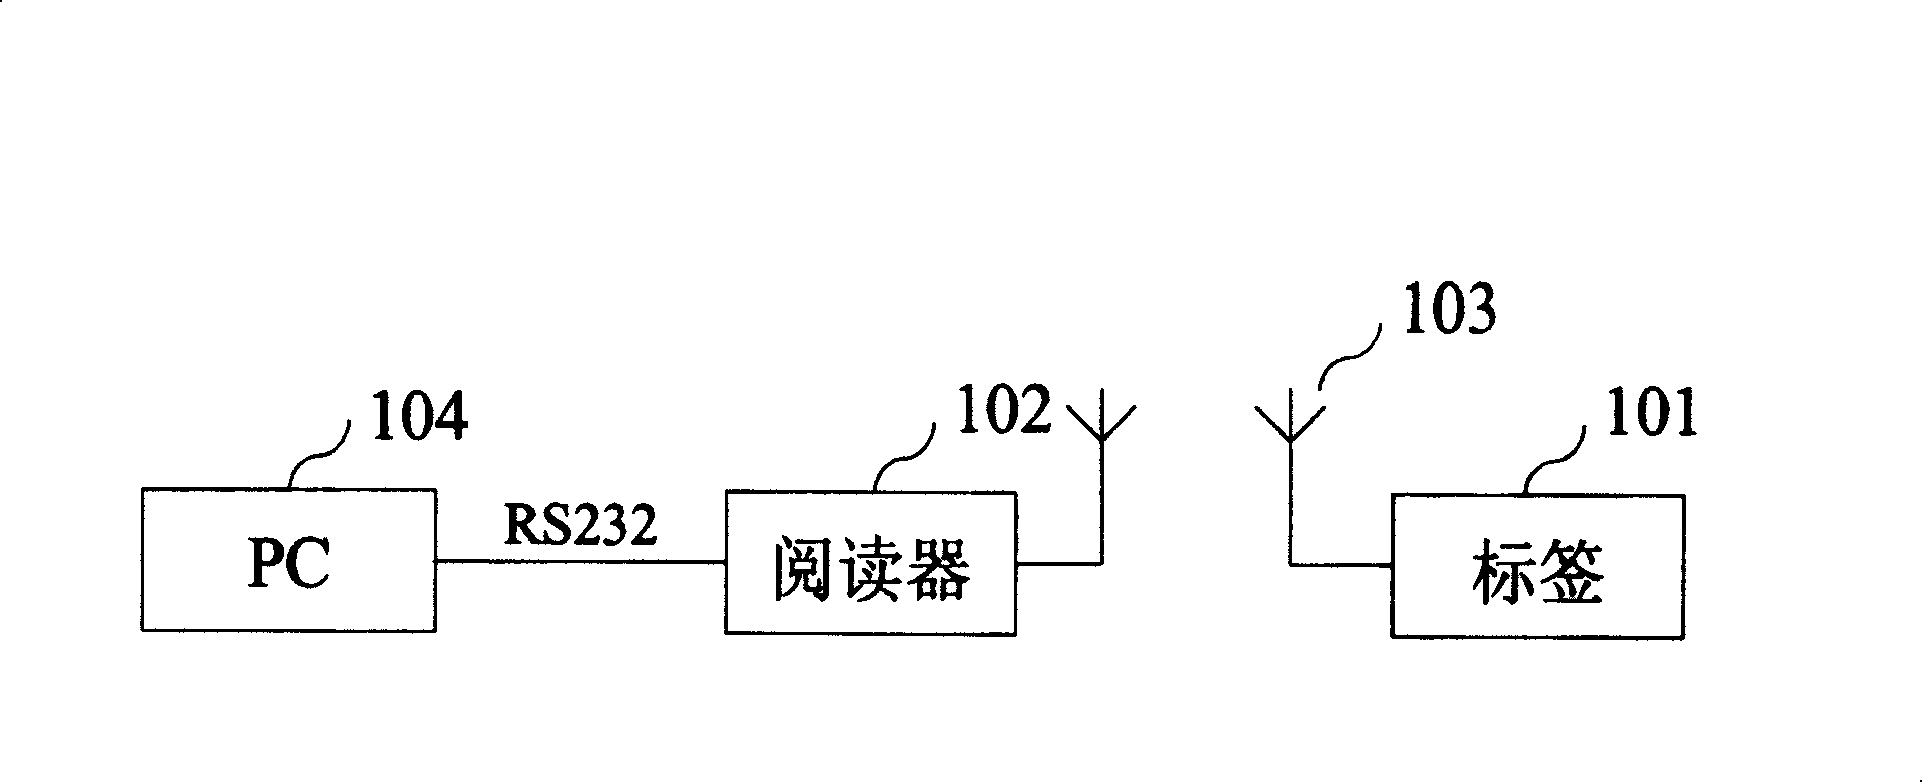 Method and system for wireless localization